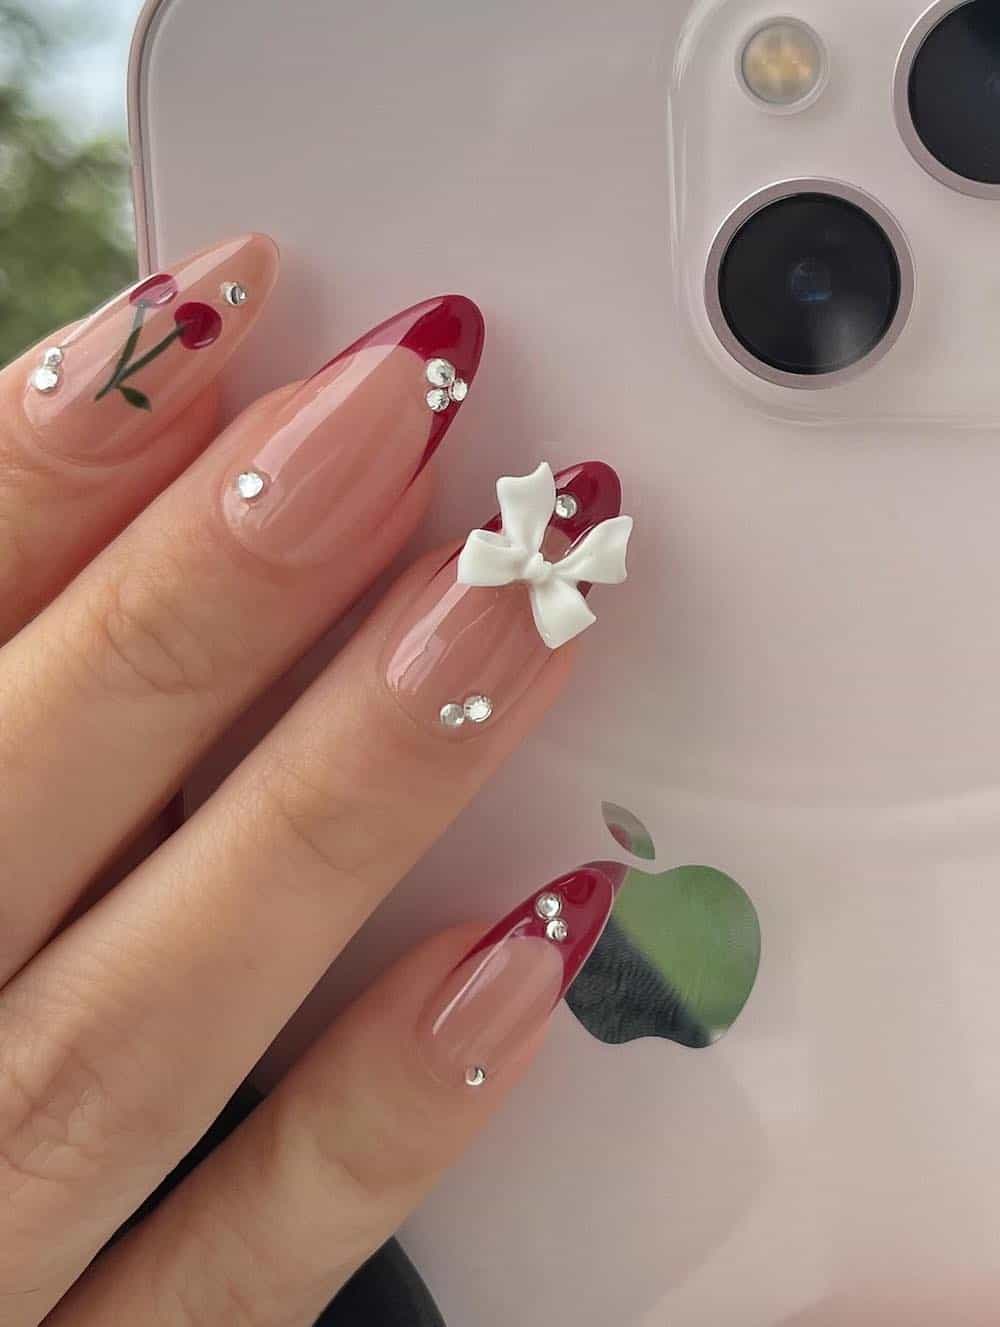 A hand with medium nude almond nails with red tips, cherry nail art, crystals accents, and white bow charms